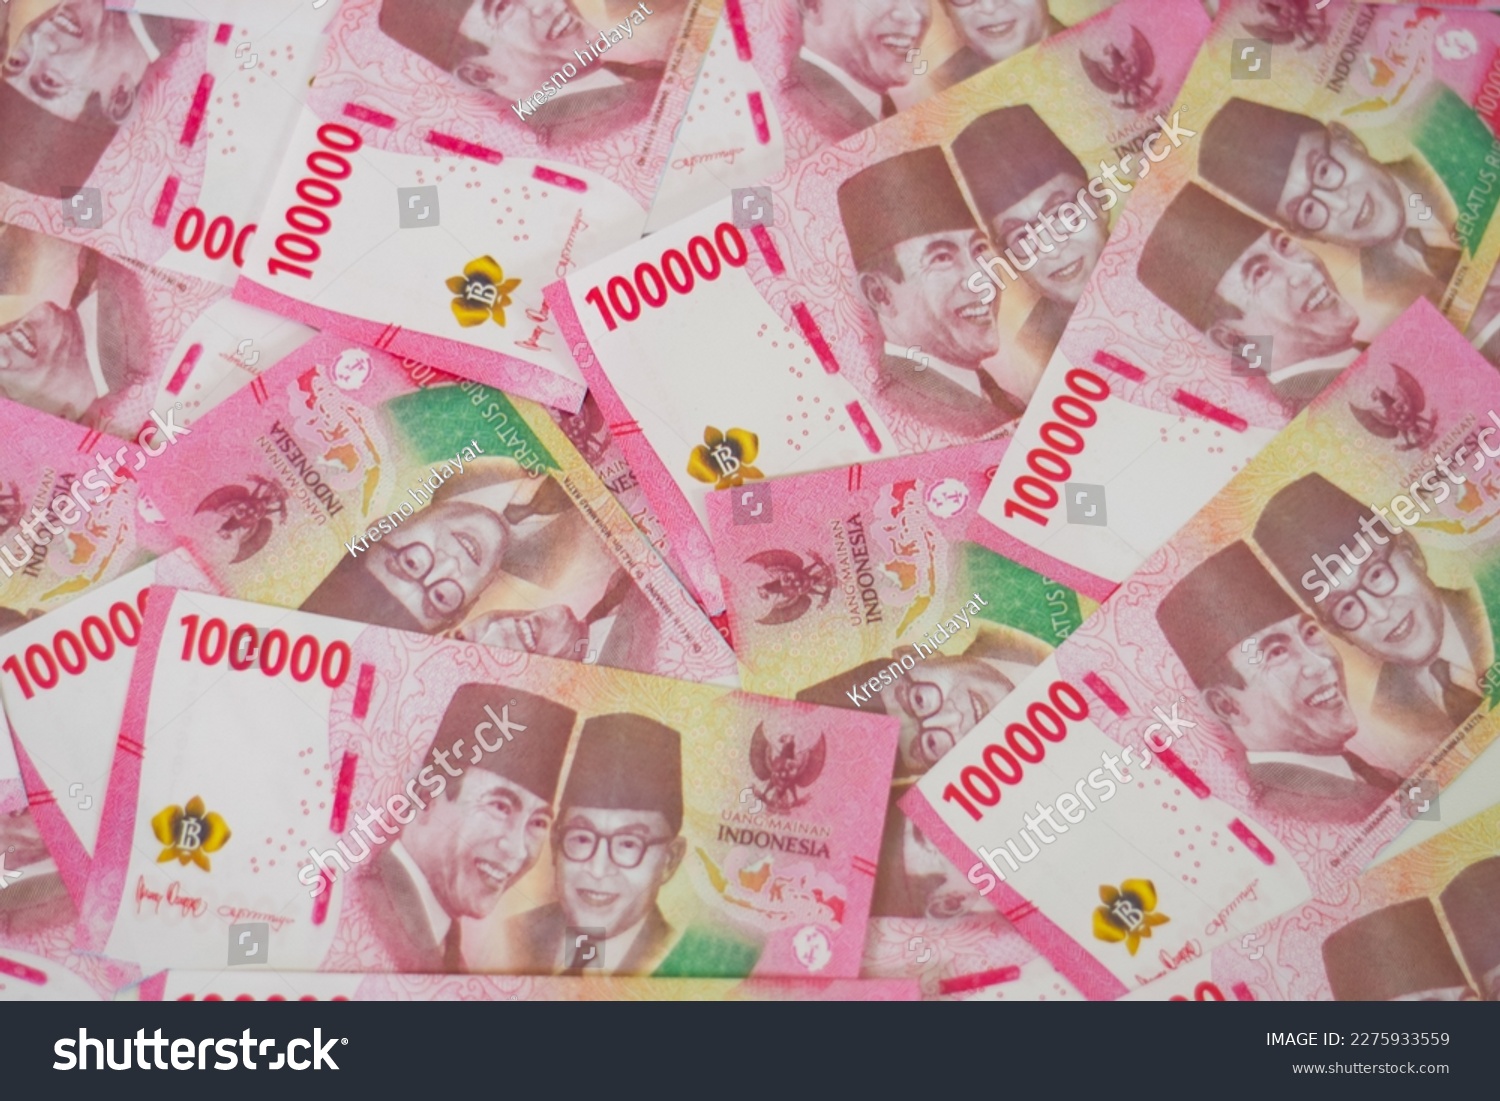 Indonesian rupiah banknotes series with the value of one hundred thousand rupiah IDR 100.000 issued since 2004, Indonesian rupiah for background

 #2275933559